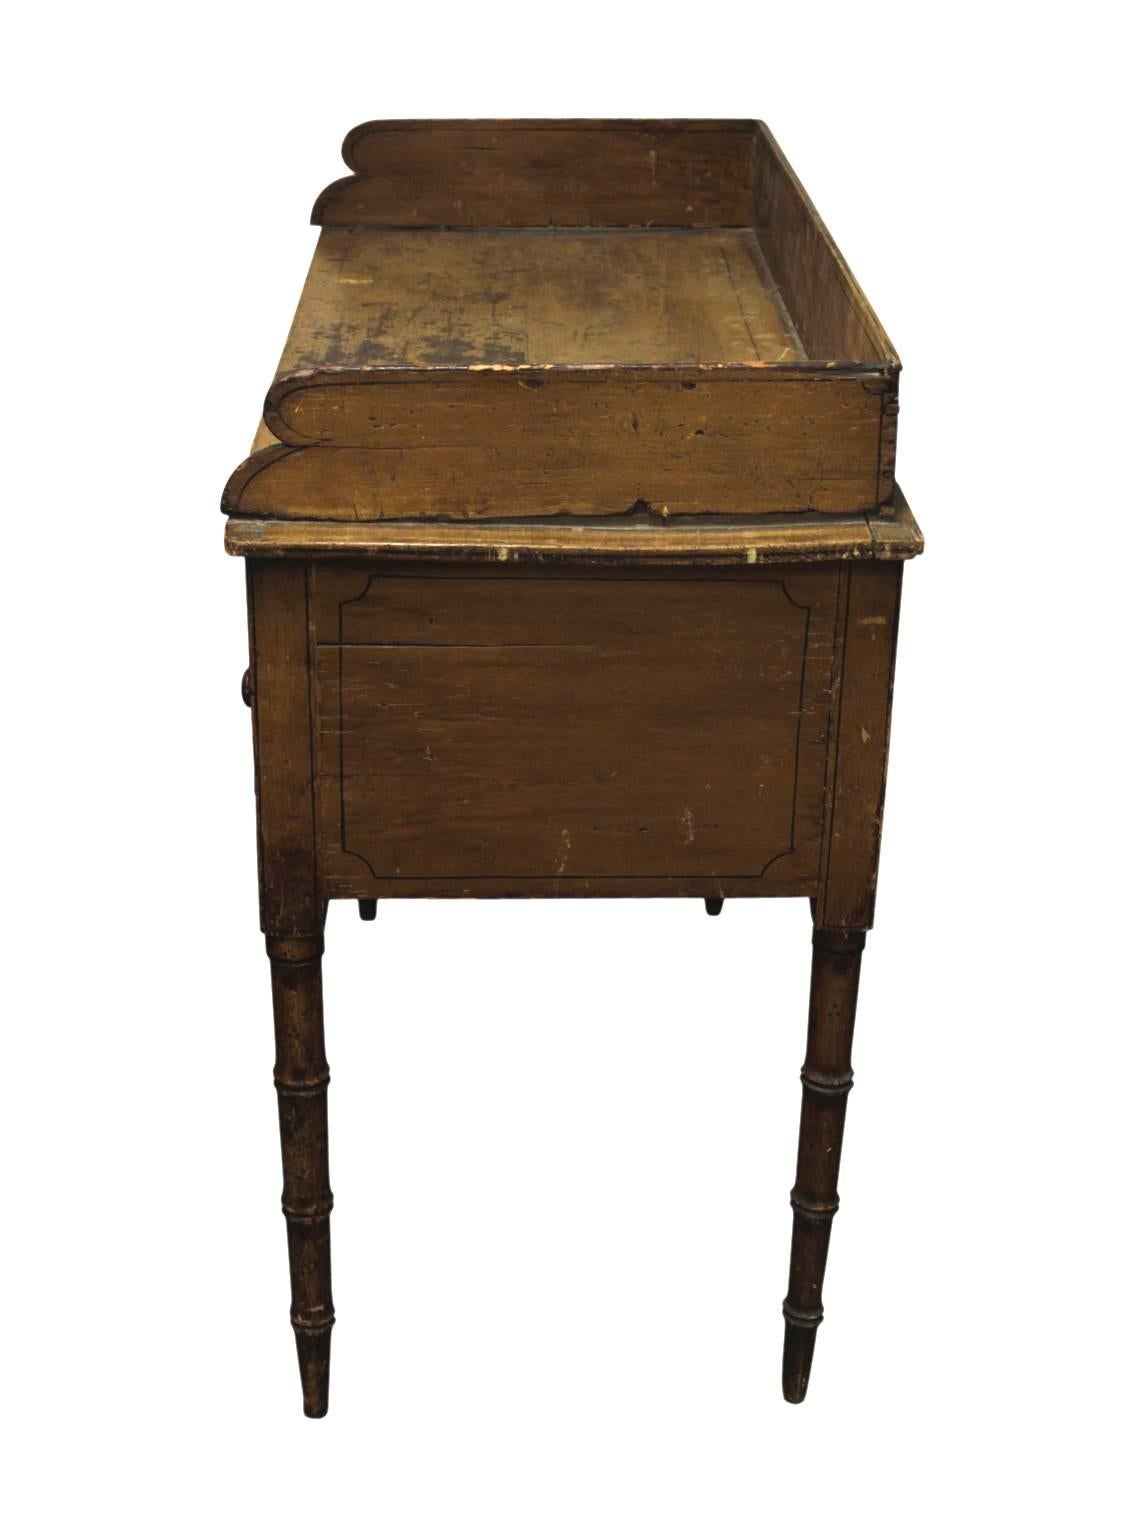 19th century writing desk or end table, with long, thin, top drawer and two large side cabinet storage spaces. Original patina, wear consistent with age and use.